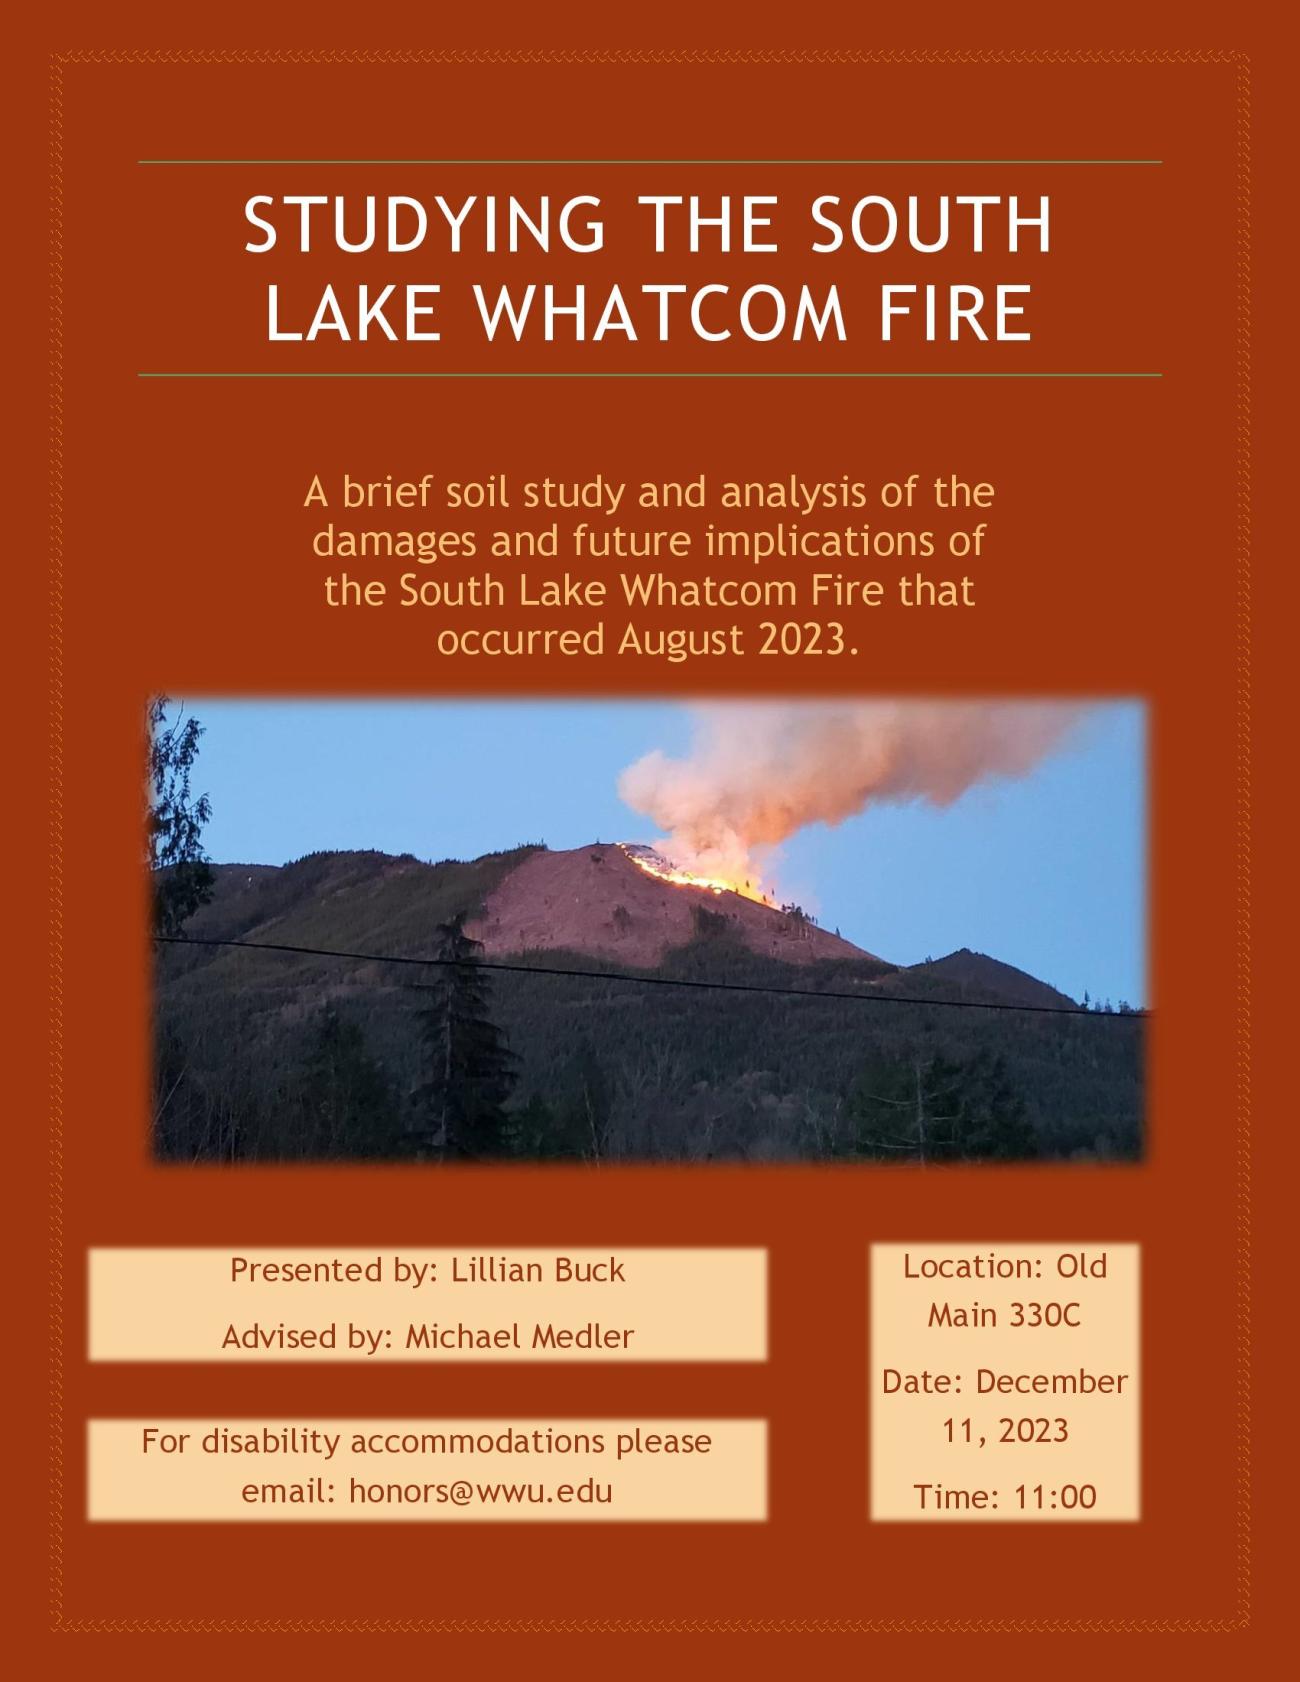 Poster with an orange background and an image of the South Lake Whatcom Fire in the middle. Text says: Studying the South Lake Whatcom Fire, A brief soil study and analysis of the damages and future implications of the South Lake Whatcom Fire that occured in August 2023. Presented by Lillian Buck. Advised by Michael Medler. Location Old Main 330C, on December 11, 2023 at 11:00.